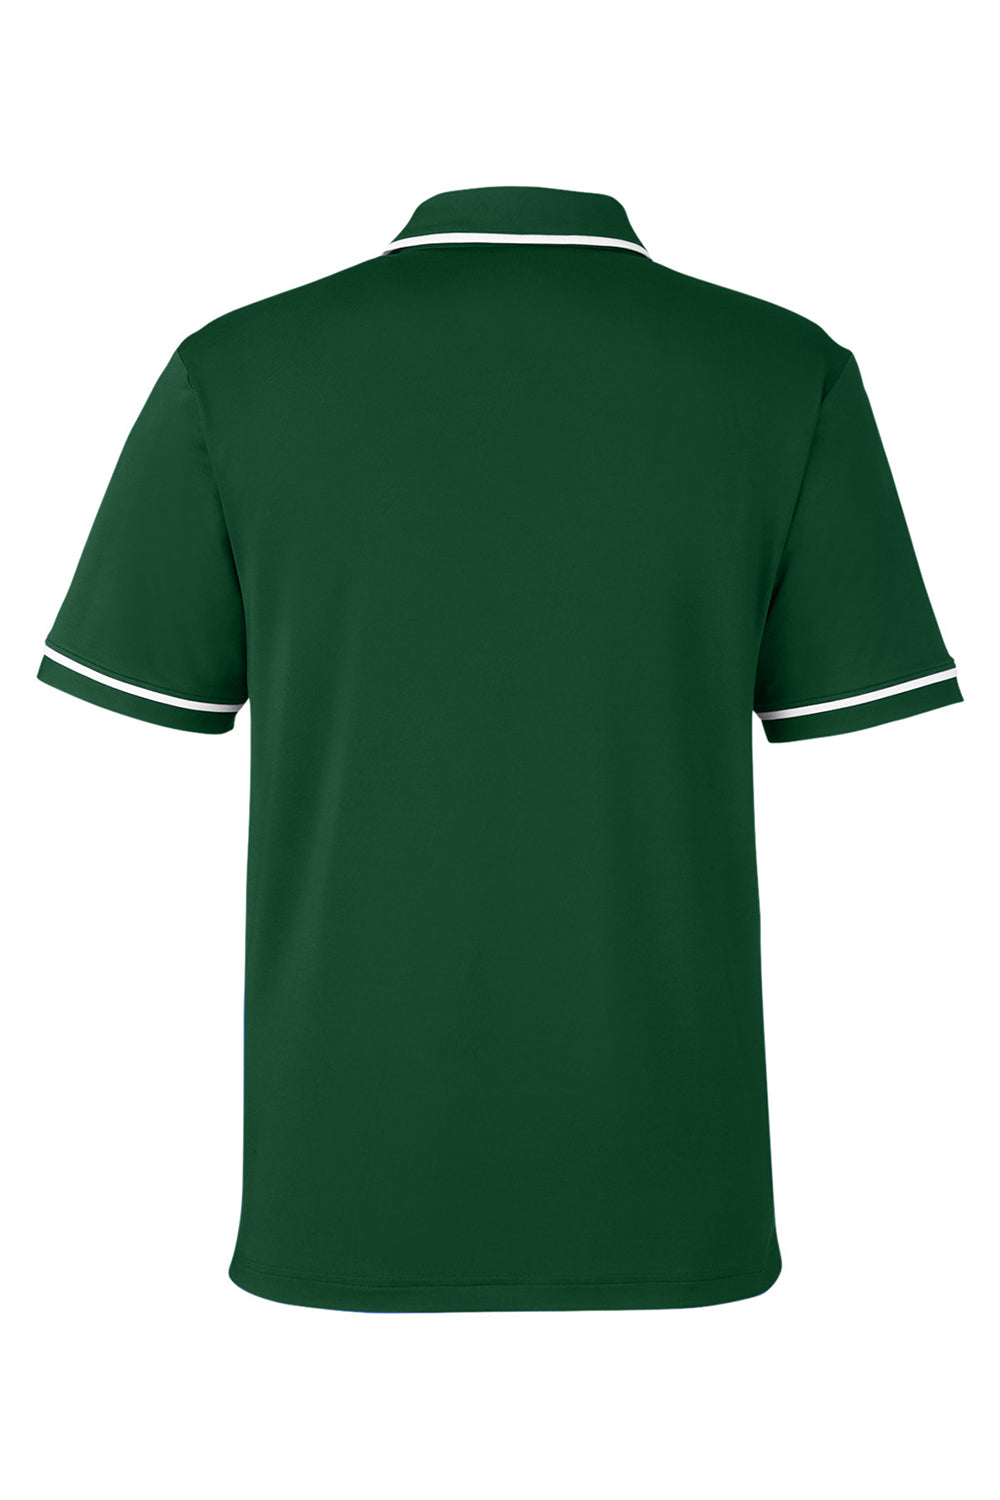 Under Armour 1376904 Mens Teams Performance Moisture Wicking Short Sleeve Polo Shirt Forest Green Flat Back